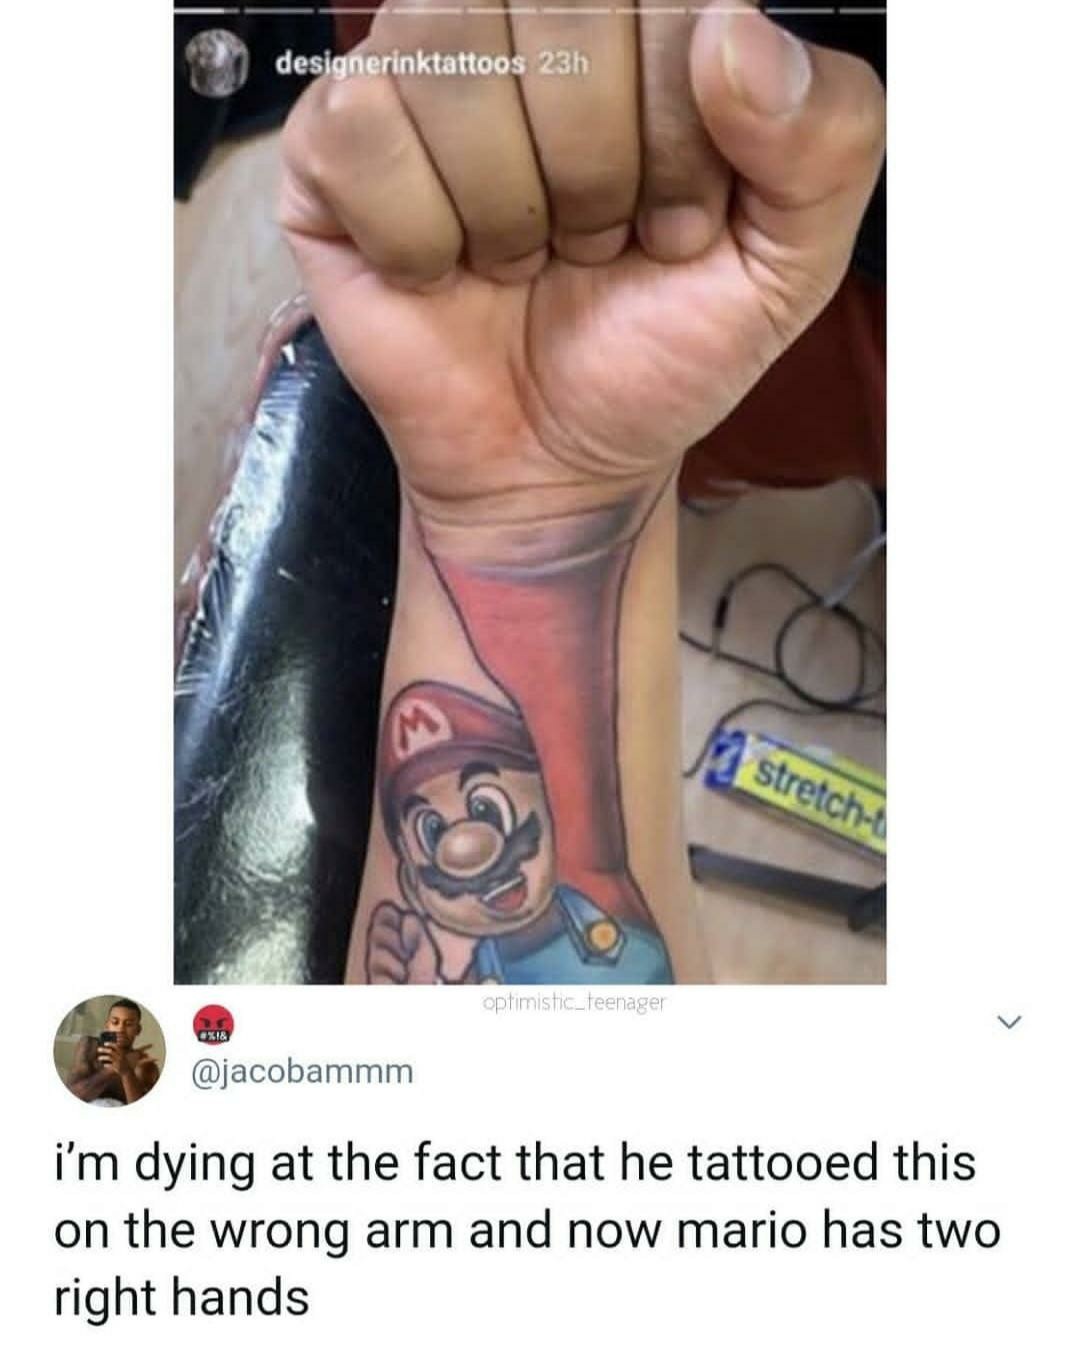 mario tattoo meme - designerinktattoos 23h stretch optimistic teenager 18 i'm dying at the fact that he tattooed this on the wrong arm and now mario has two right hands